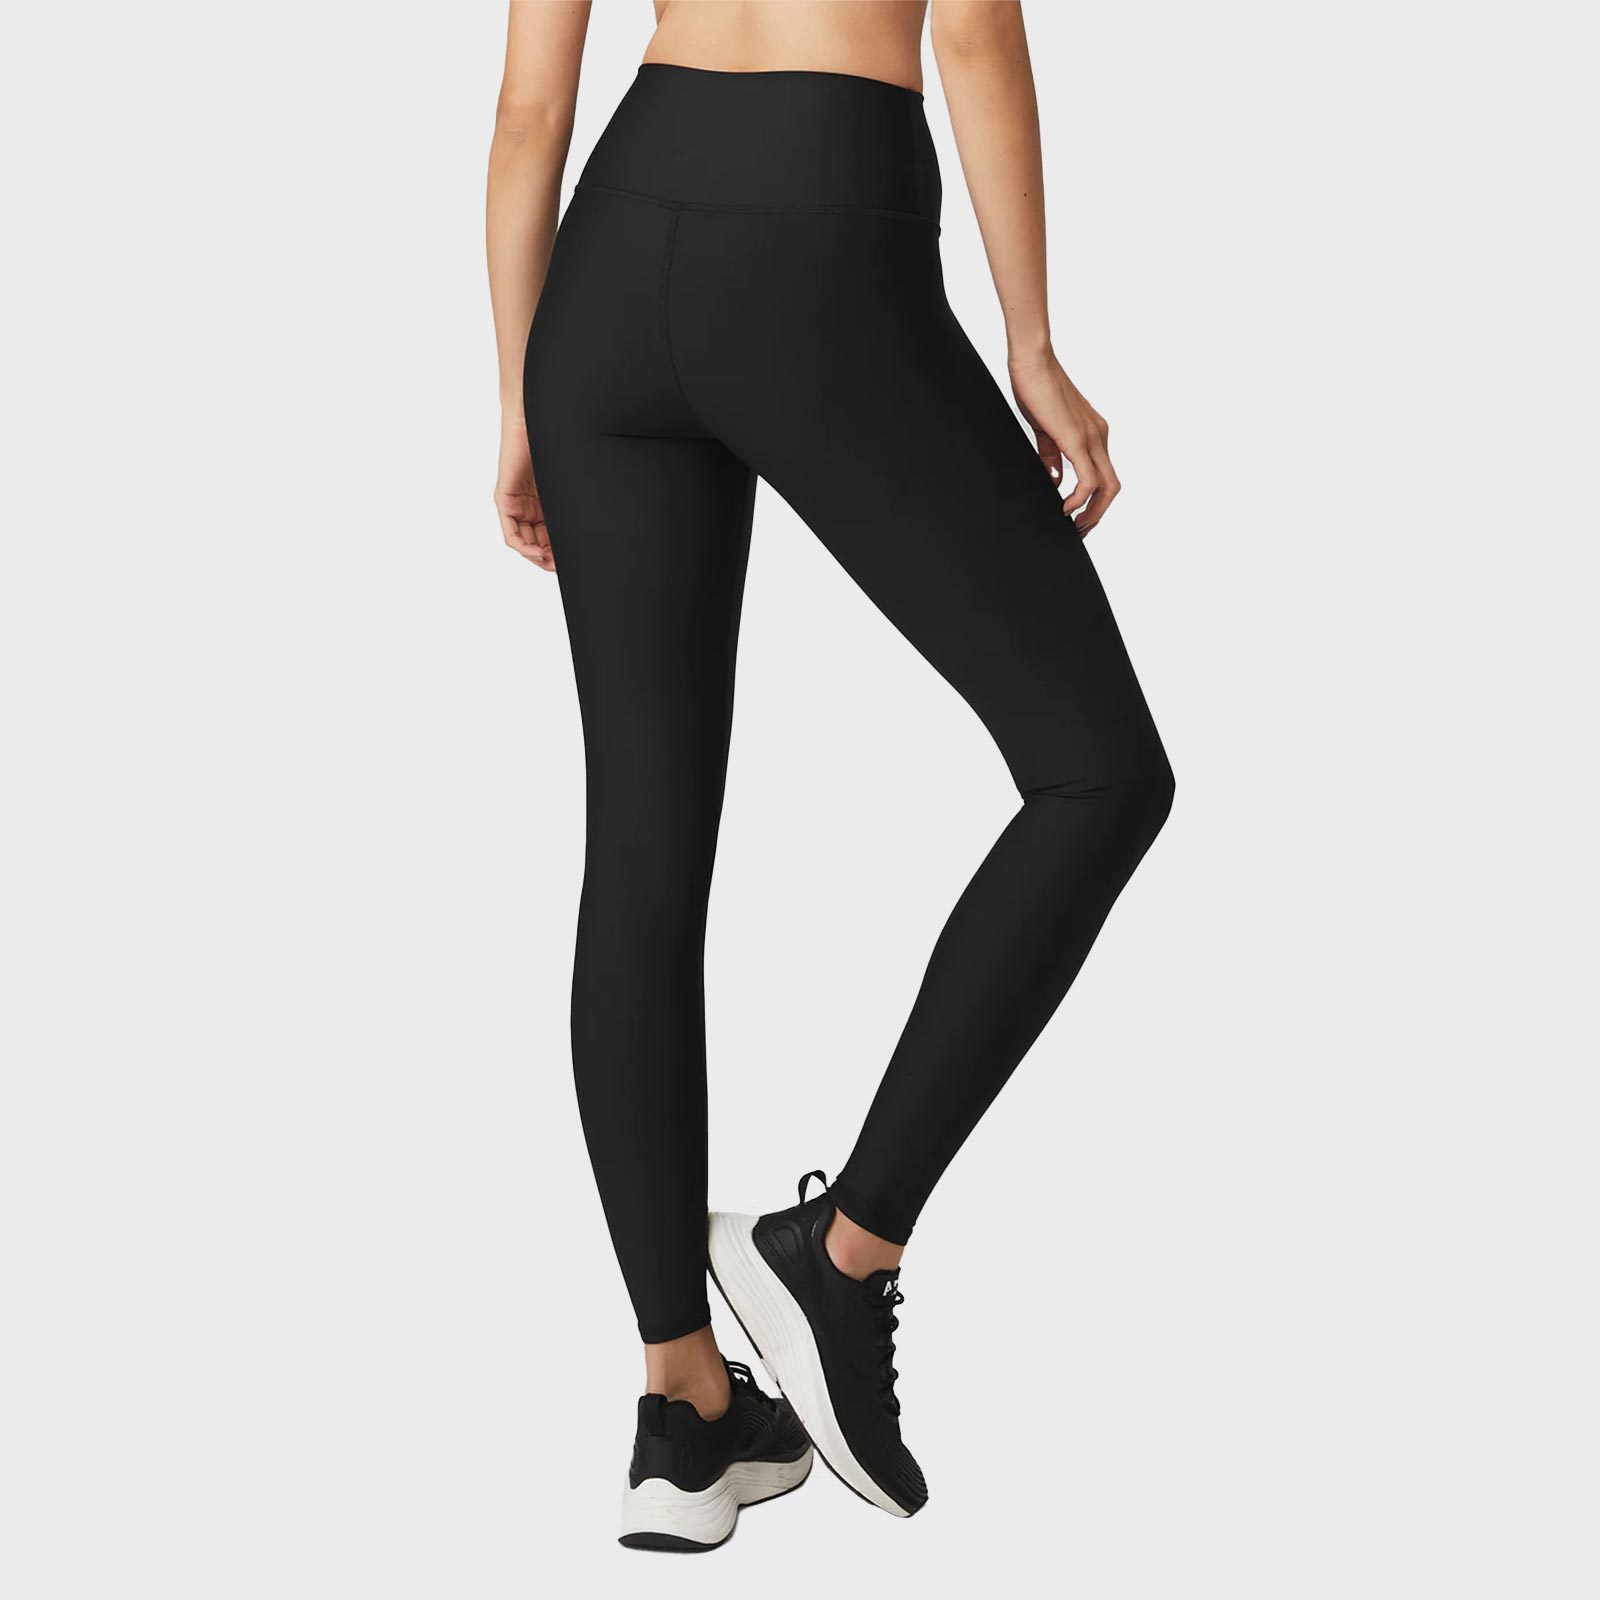 Which Leggings Make Your Bum Bigger